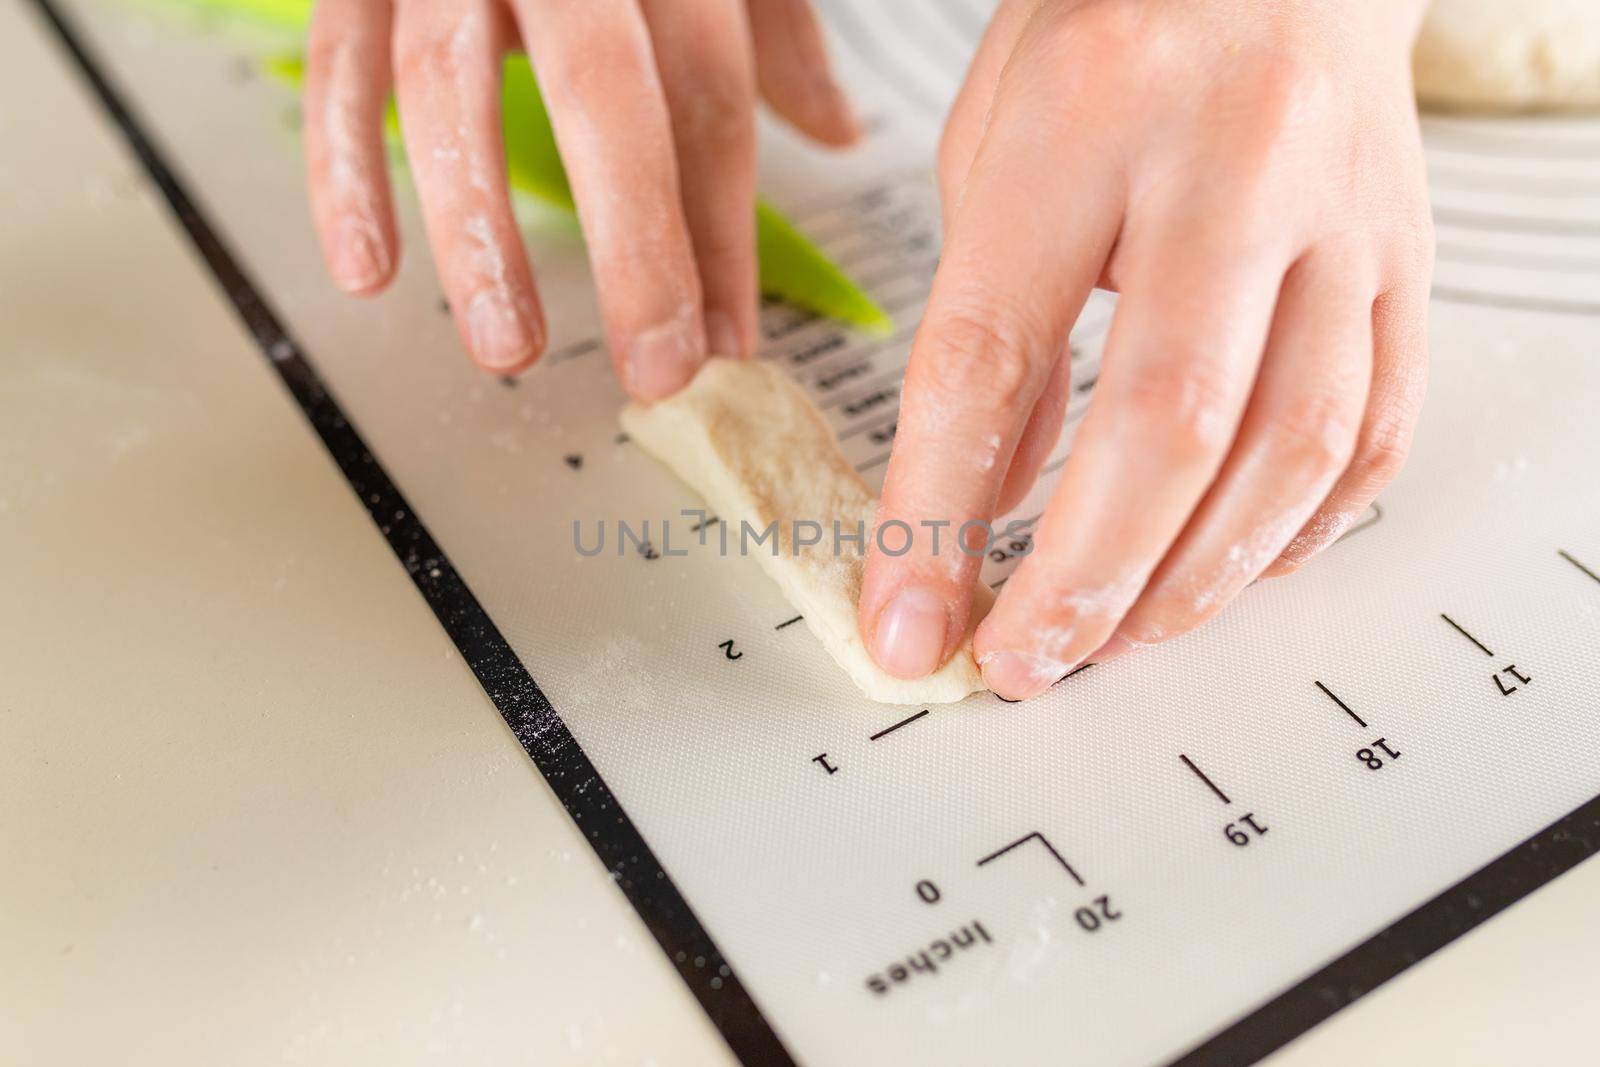 Close-up of hands measuring the length of a piece of dough on a kitchen mat with inch markings.